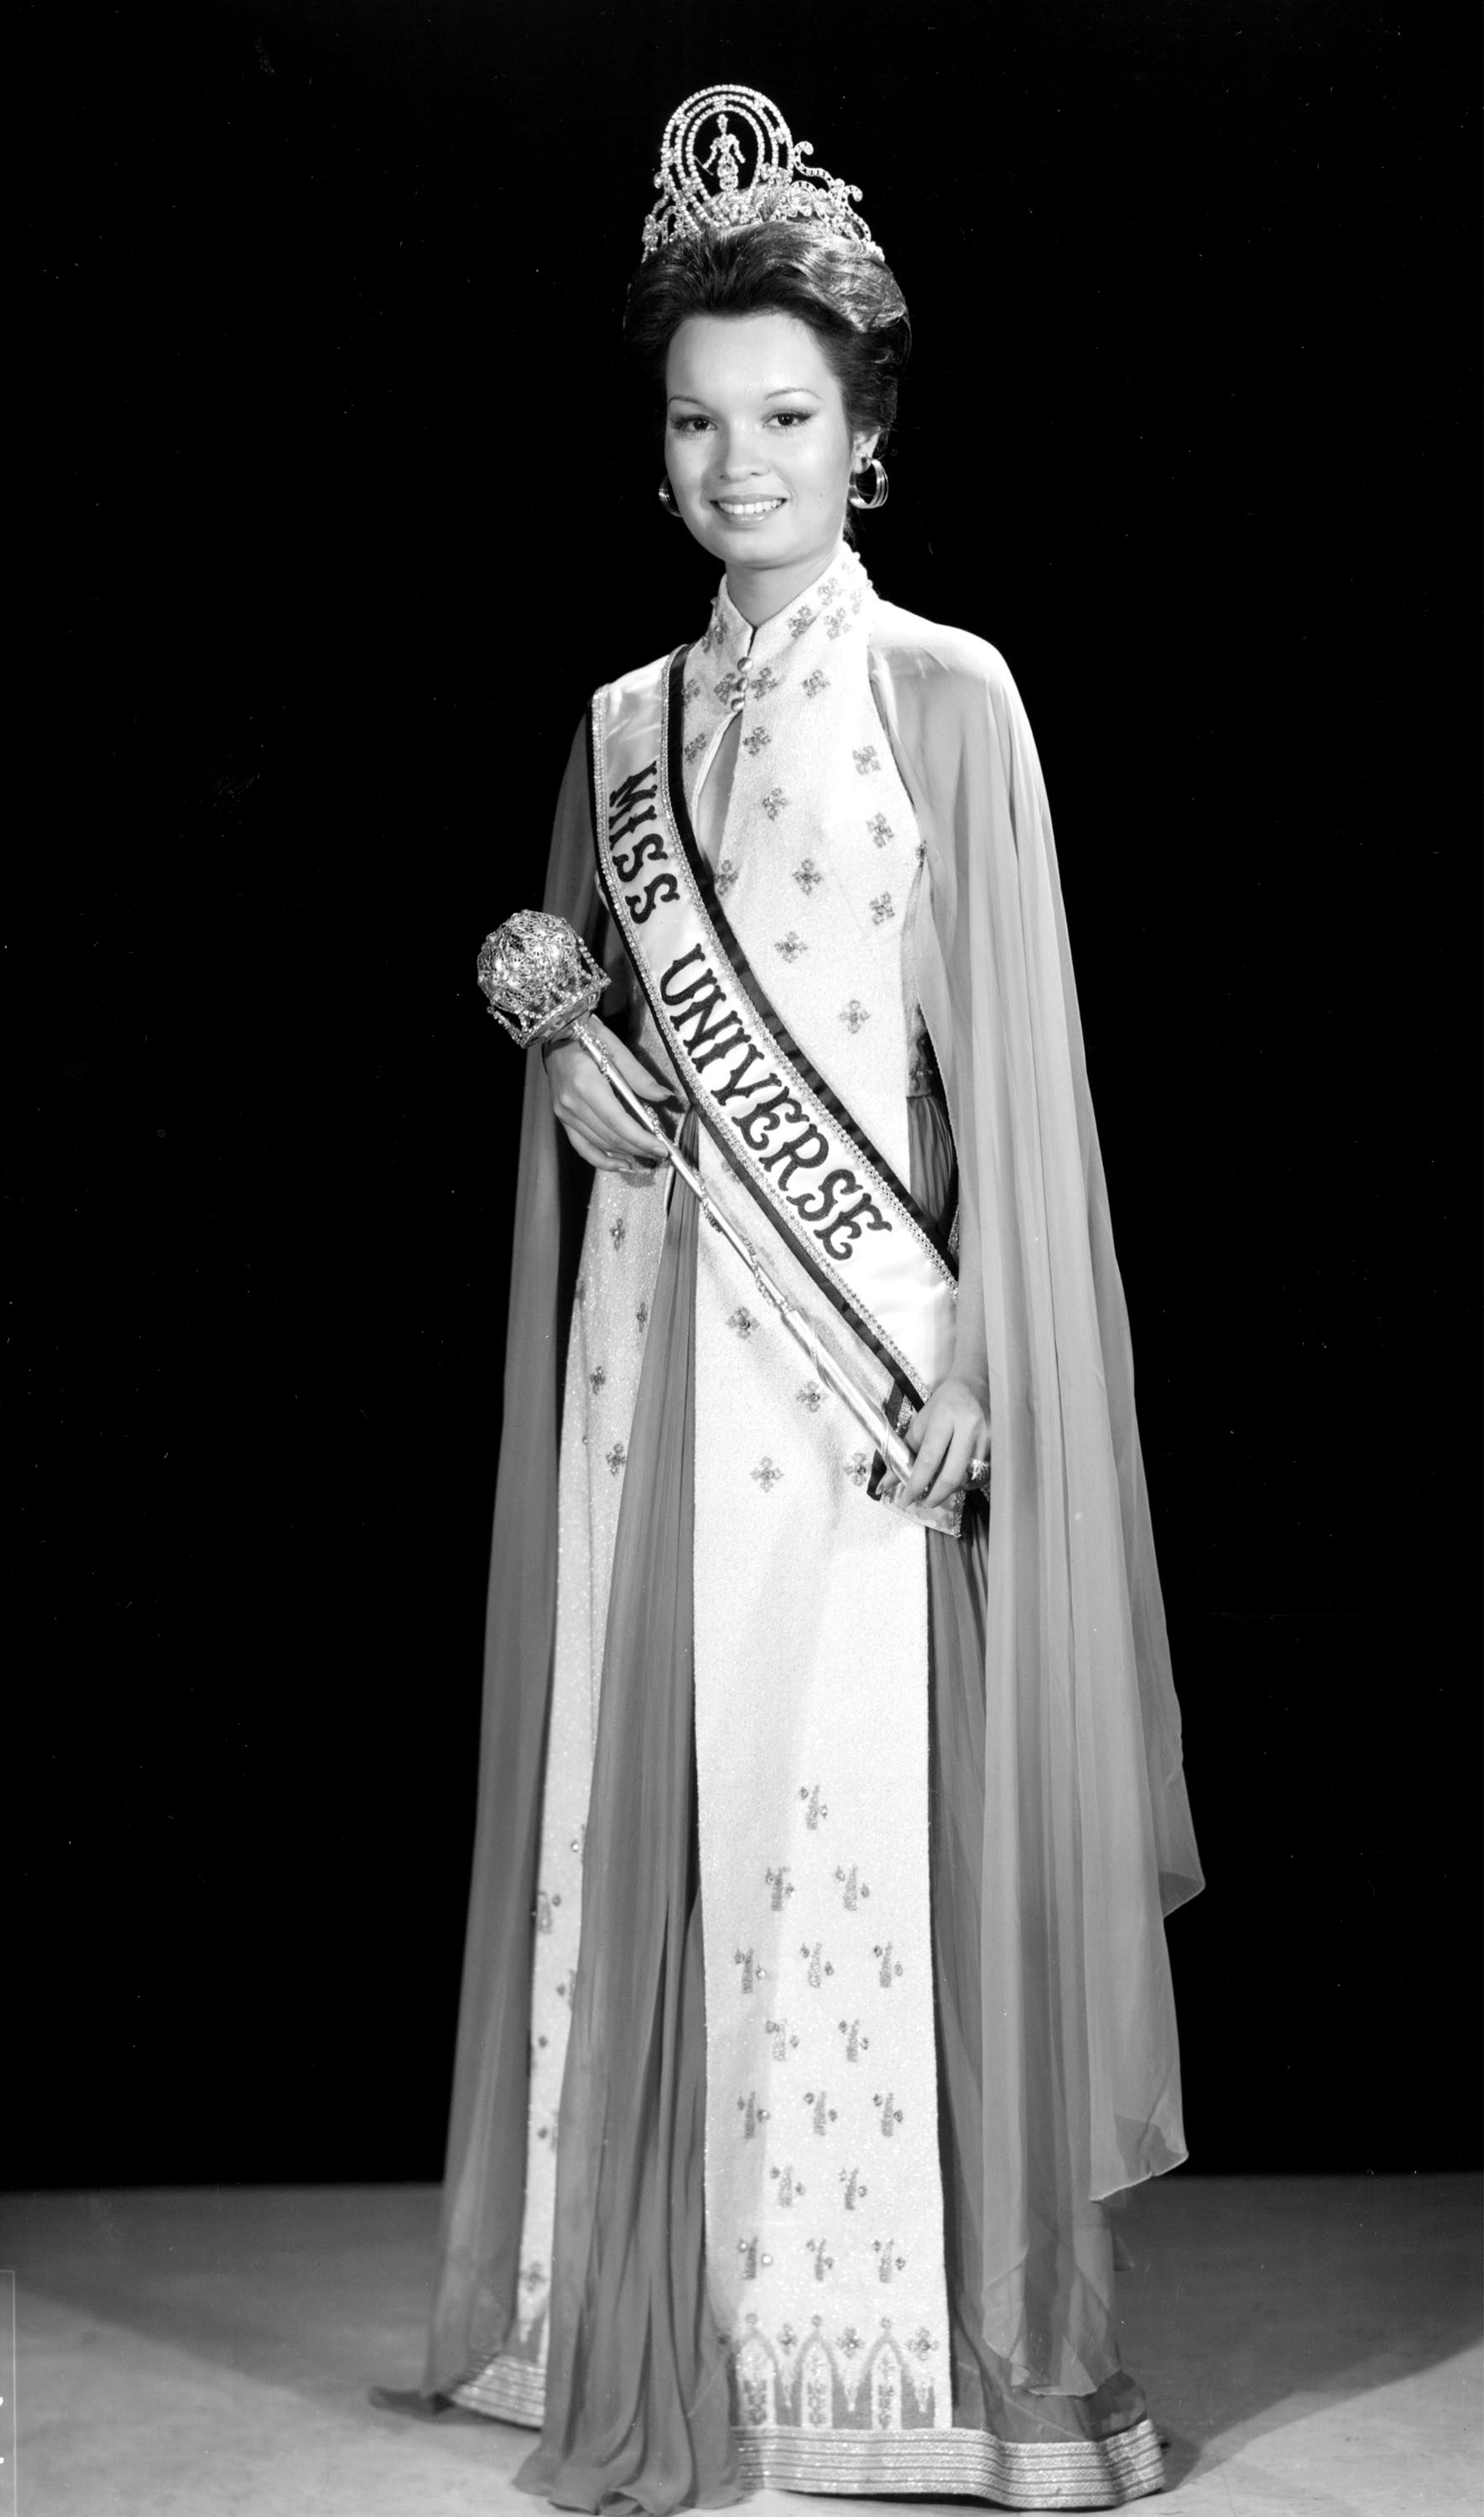 SECOND MISS UNIVERSE. Maria Margarita Moran, Miss Universe 1973, poses for one of her official photos. Photo from Miss Universe Organization 